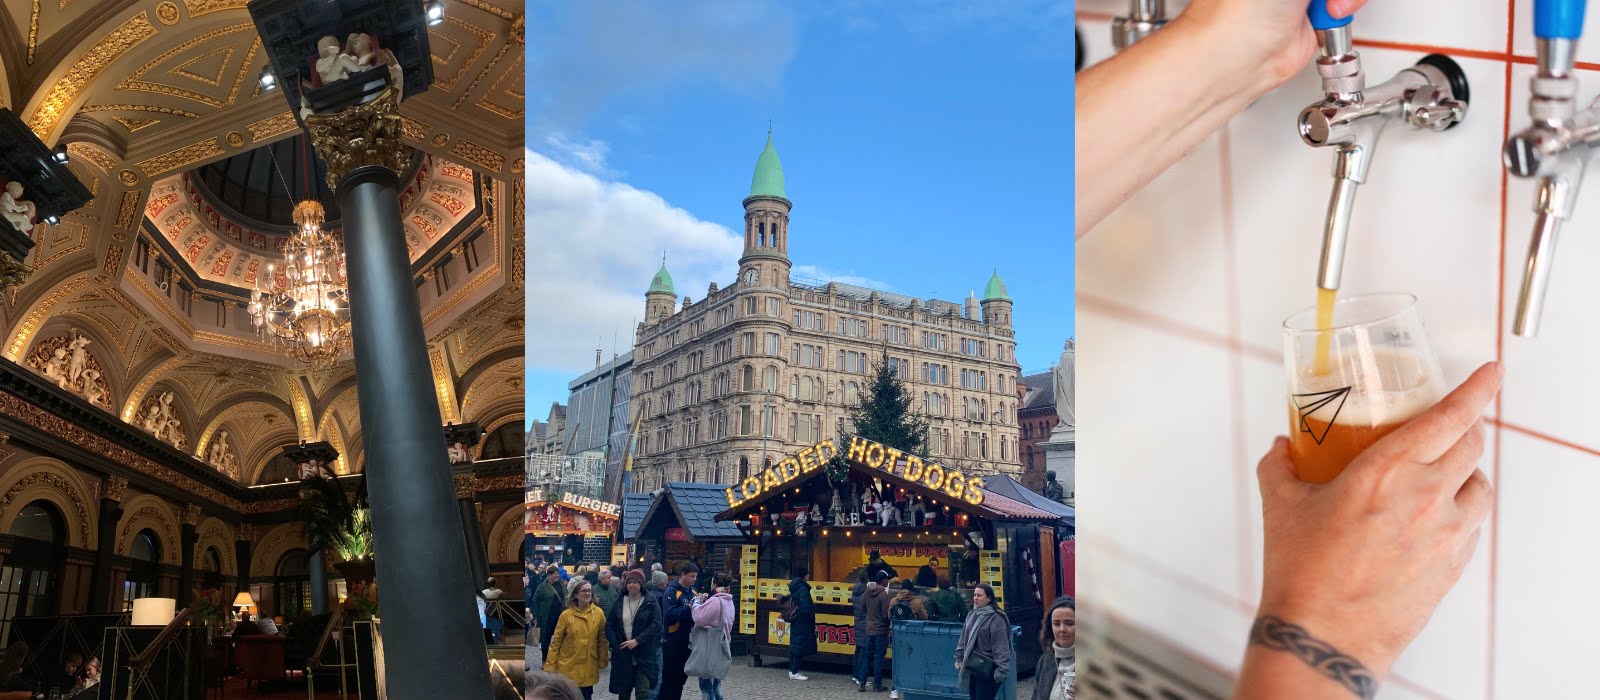 48 hours in Belfast: A weekend with it all